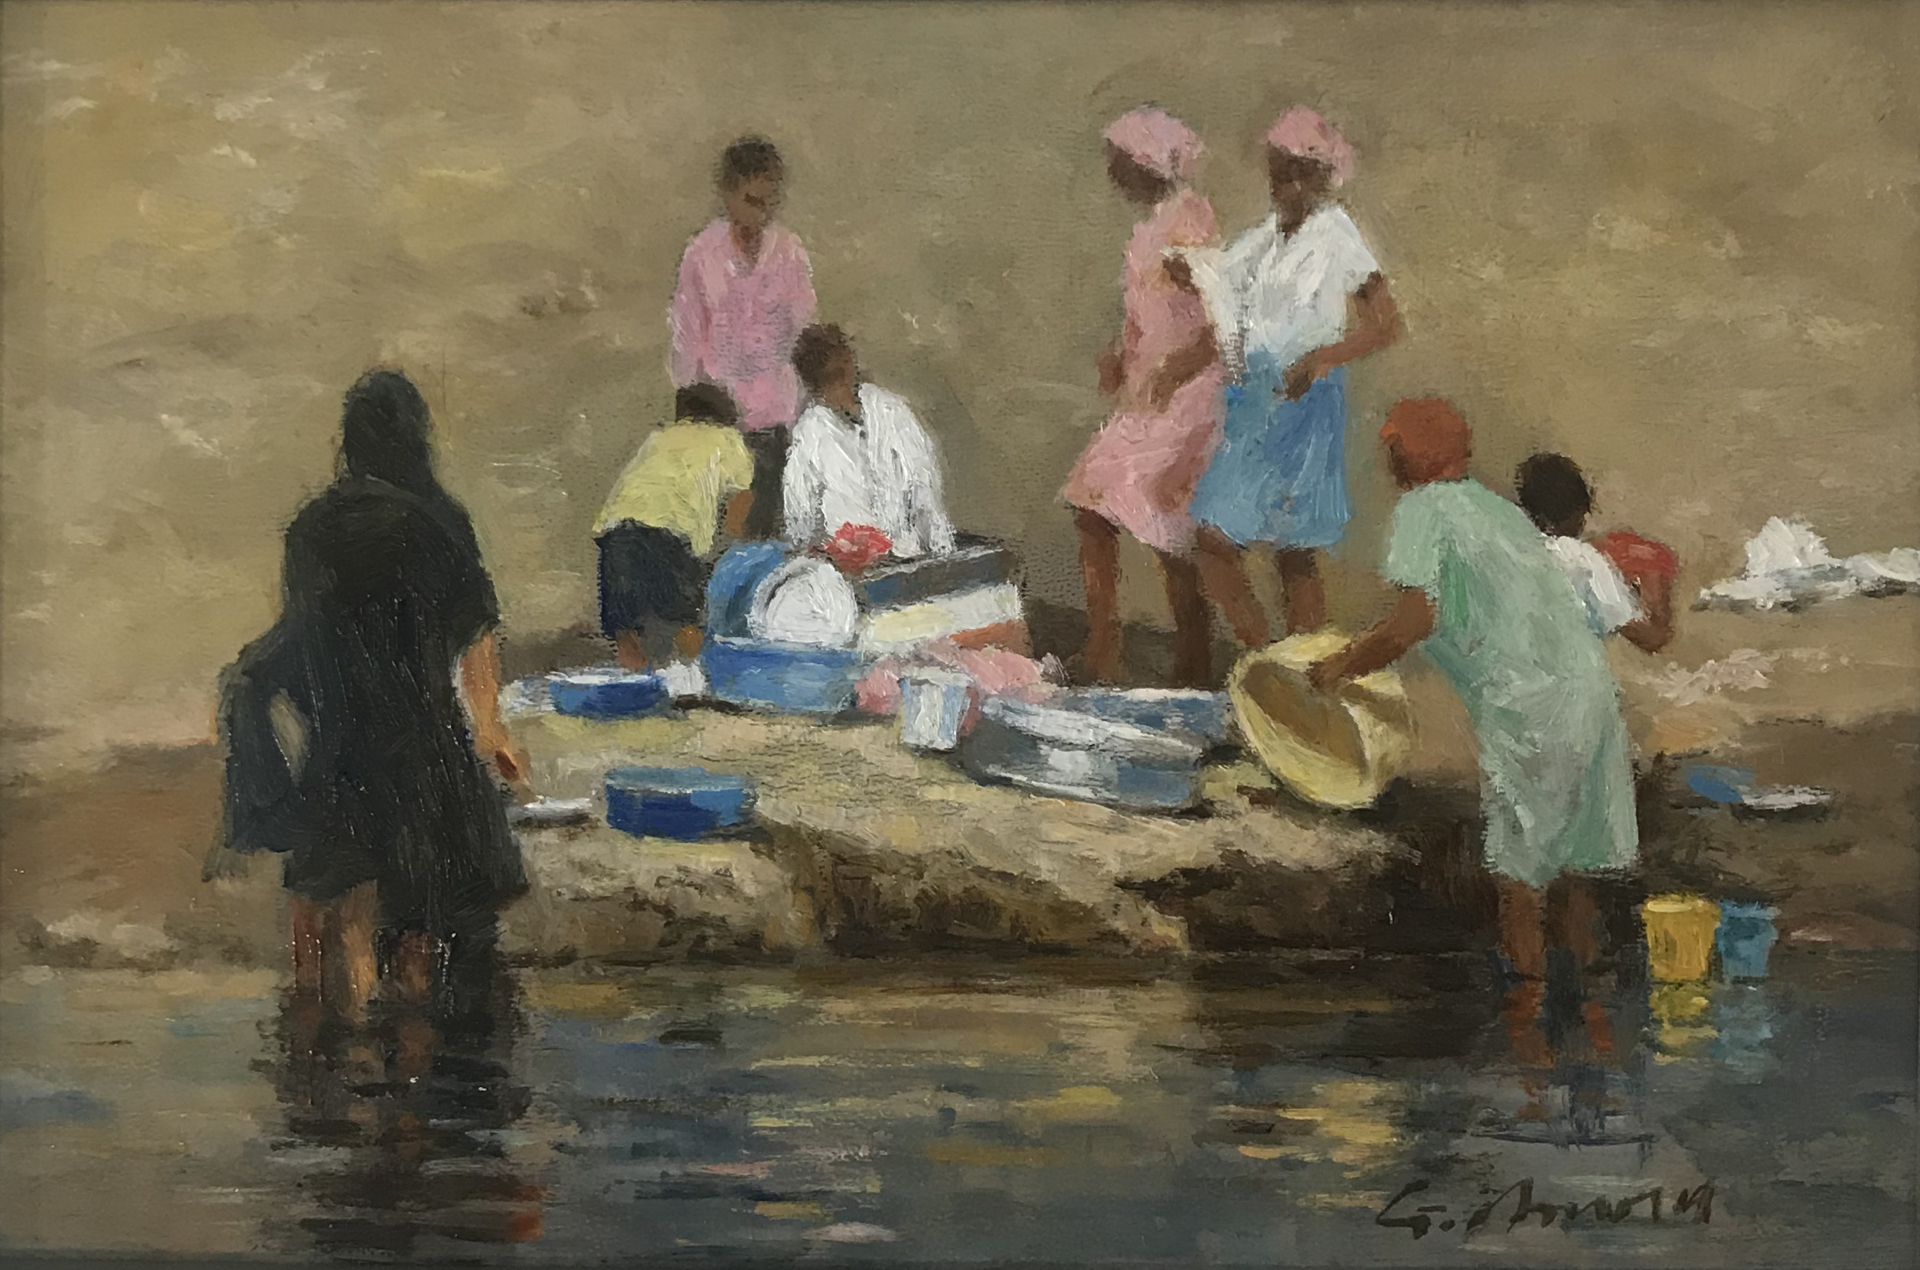 Figures Washing Clothes by Gerhard Arnold